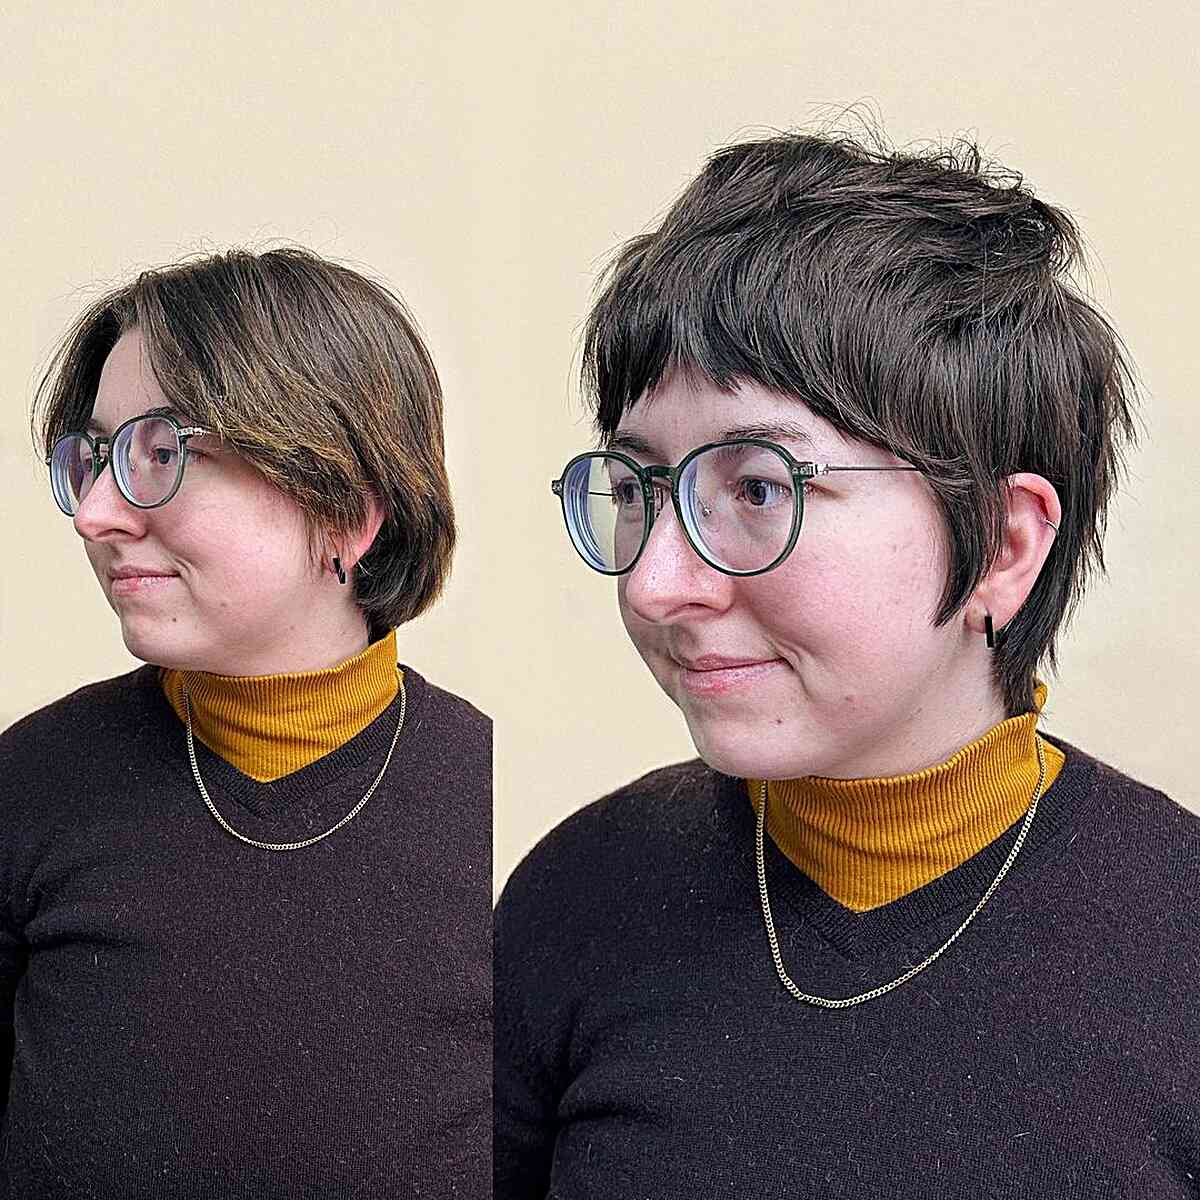 Short Razor Cut Long Pixie for Women with Glasses and Round Faces